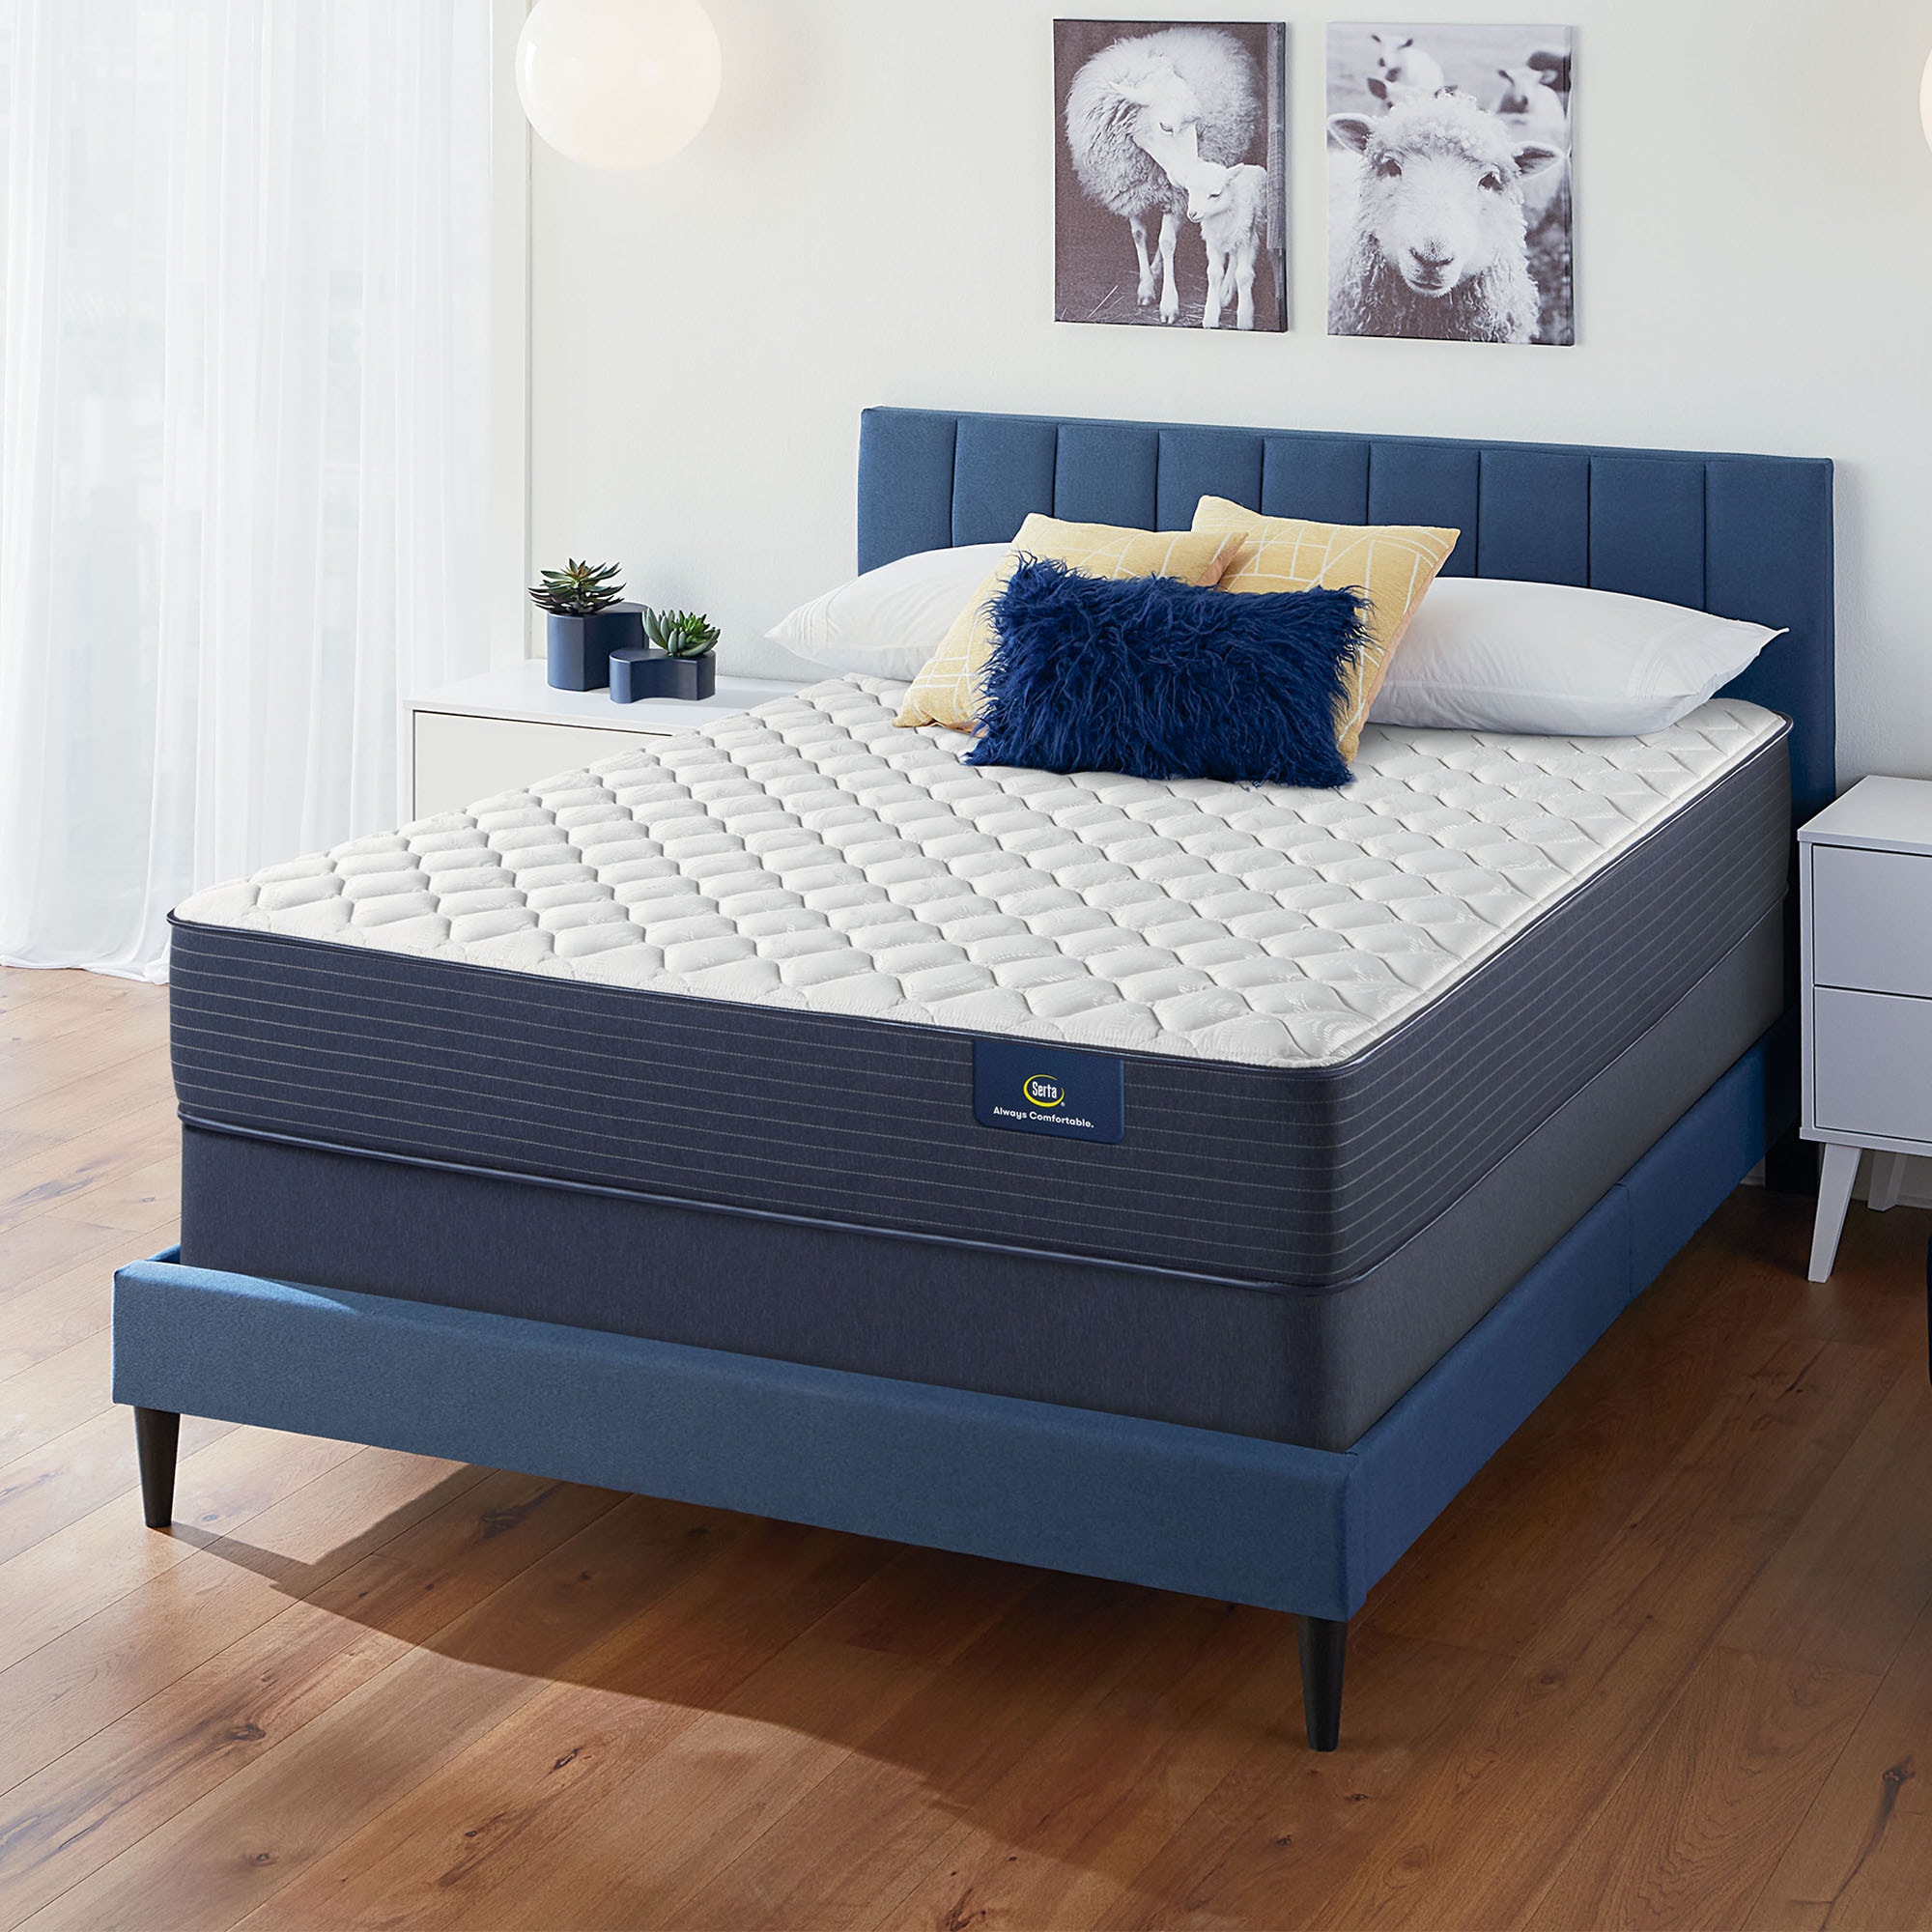 Rechtdoor Rang hoed Box Spring Included Mattresses at Lowes.com